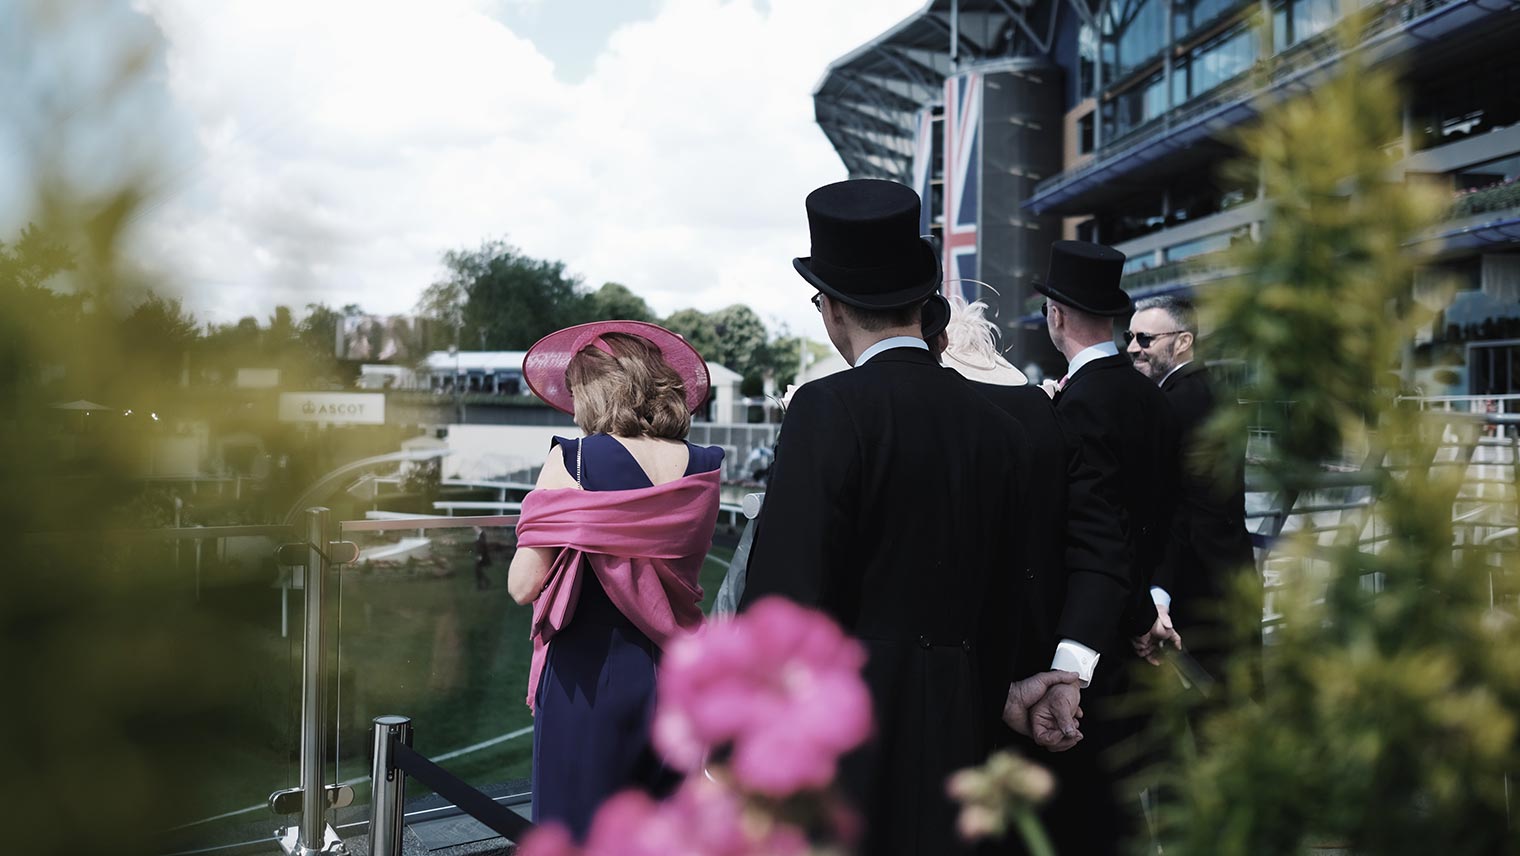 People dressed up at Ascot racecourse